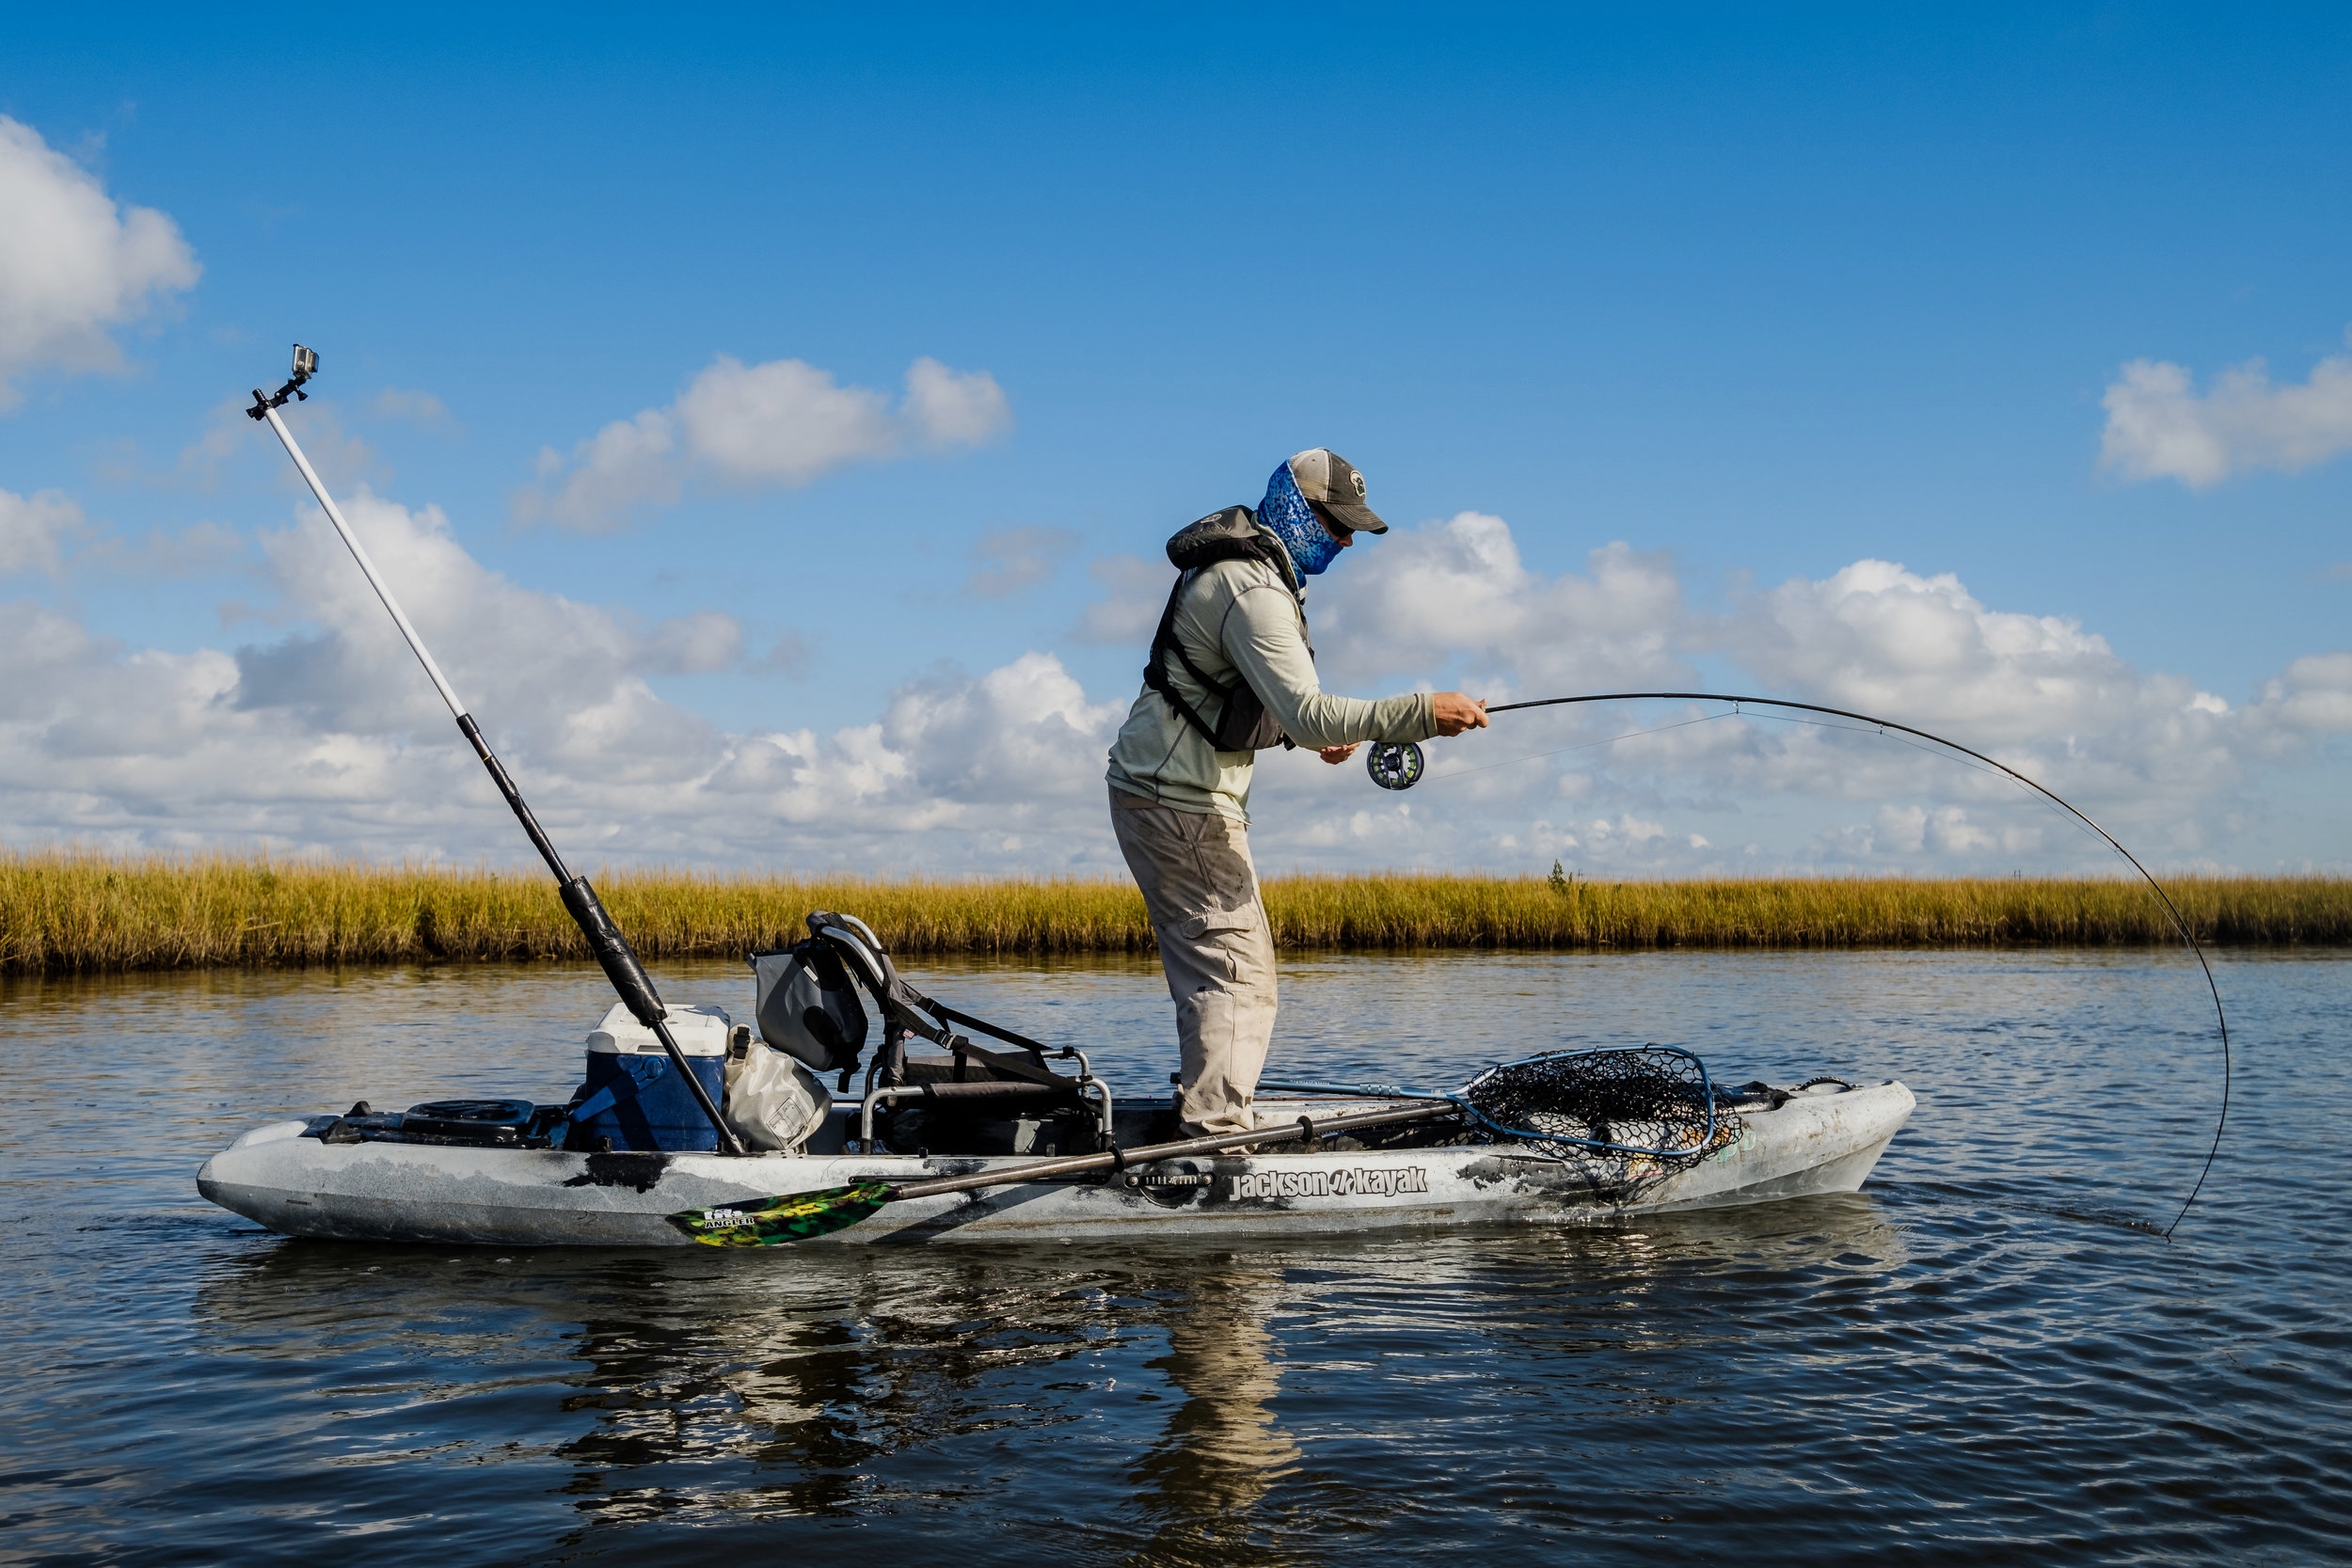 How to Paddle a Fishing Kayak? 